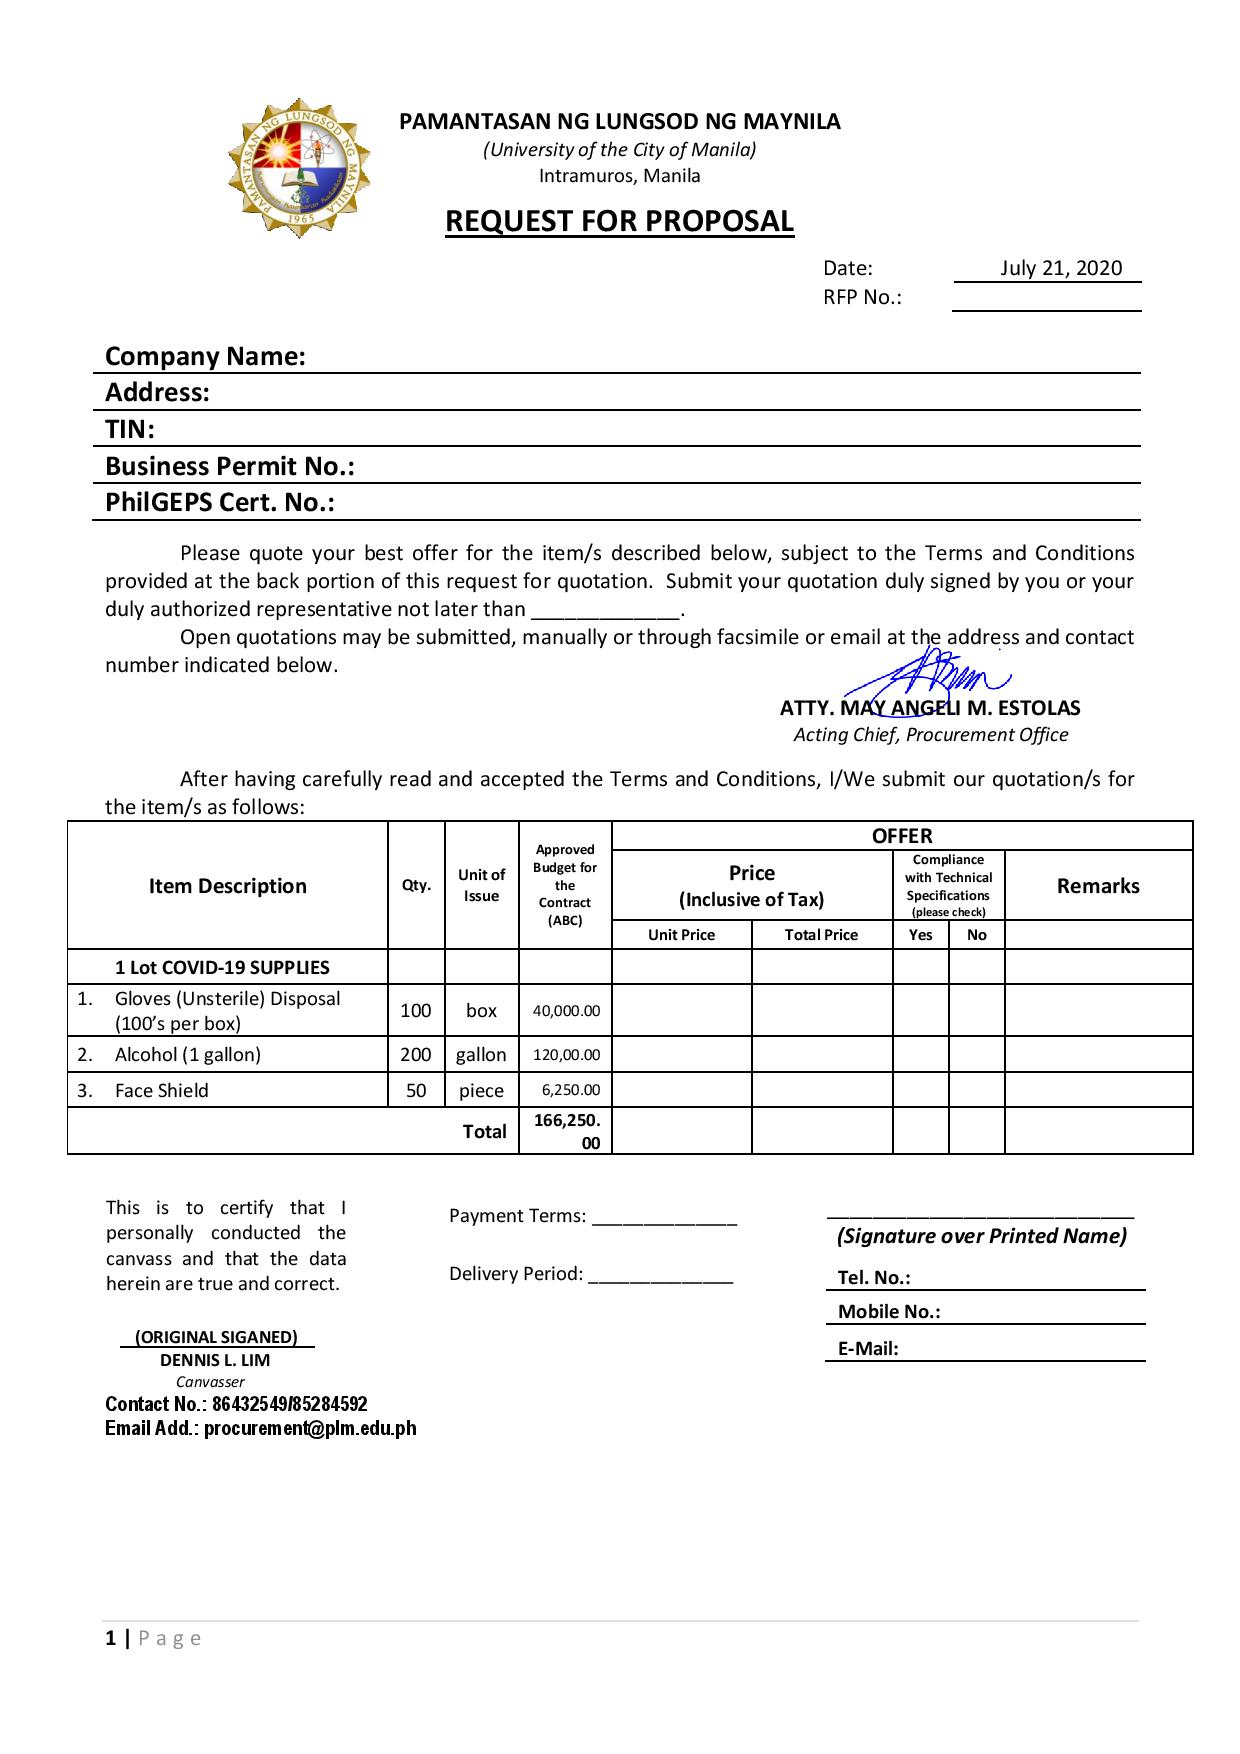 Request for Price Quotation Form 1 Lot COVID 19 SUPPLIES page 001